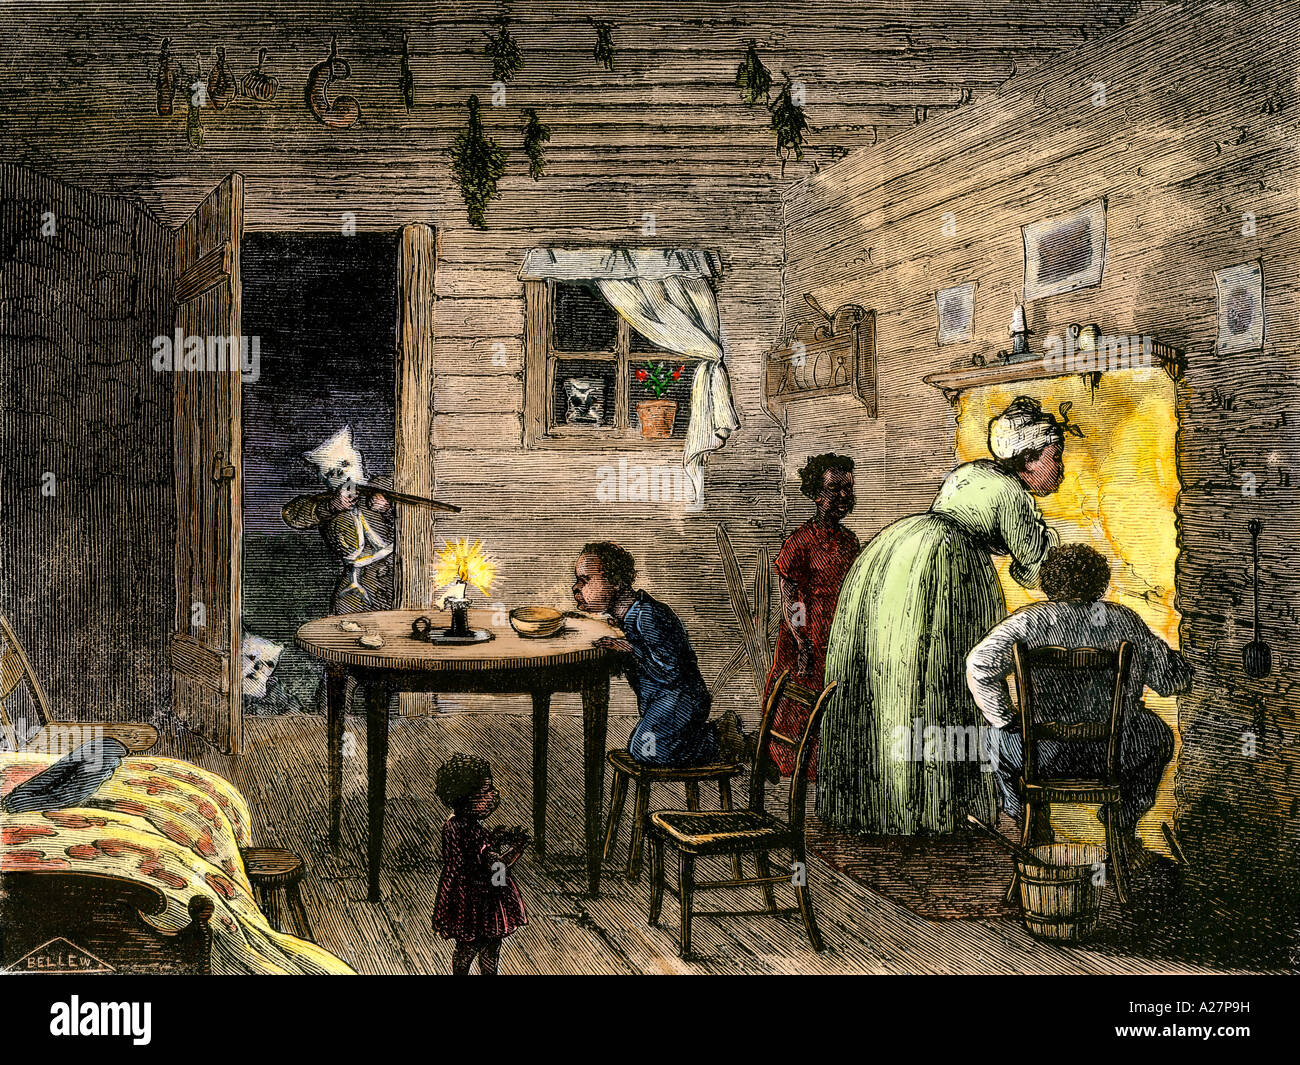 Ku Klux Klan members shooting an African-American family in their cabin in the South 1870s. Hand-colored woodcut Stock Photo